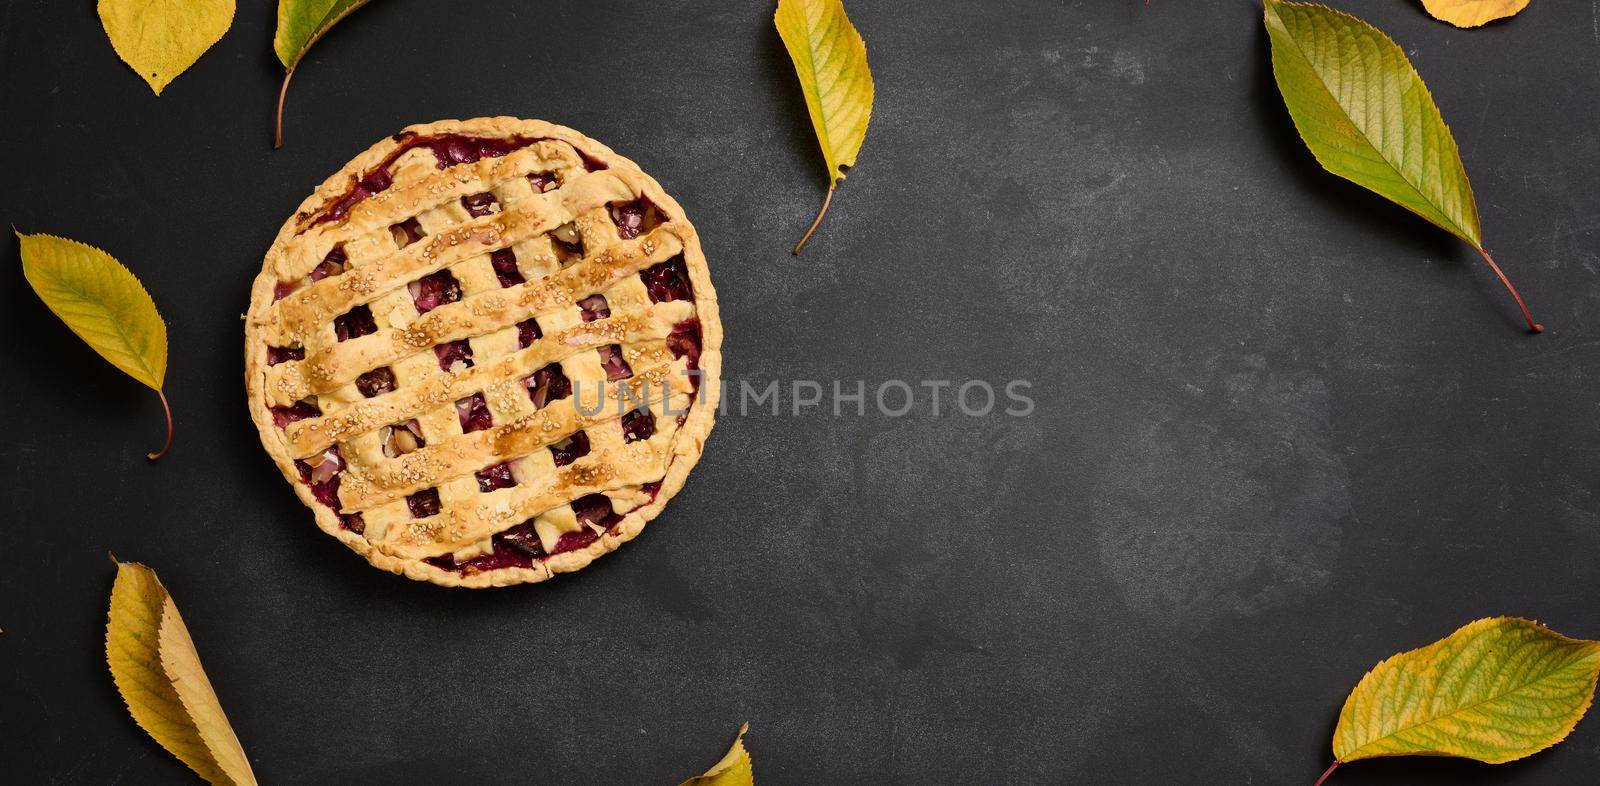 baked round pie with plums on a black background, top view. Place for inscription